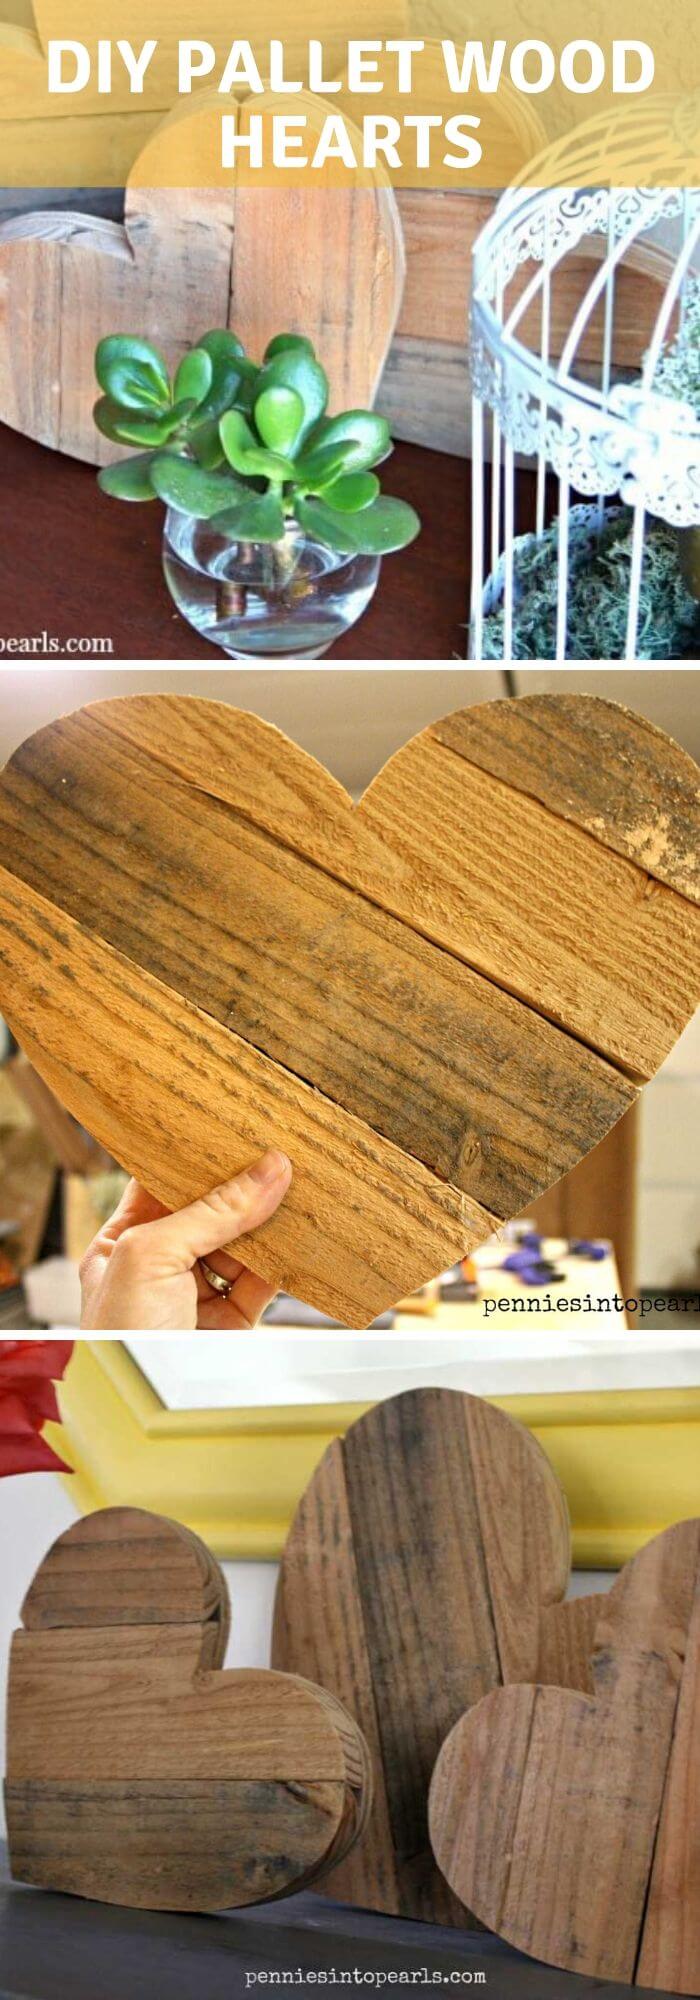 The anniversary heart sets - DIY Rustic Wood Heart Ideas & Projects